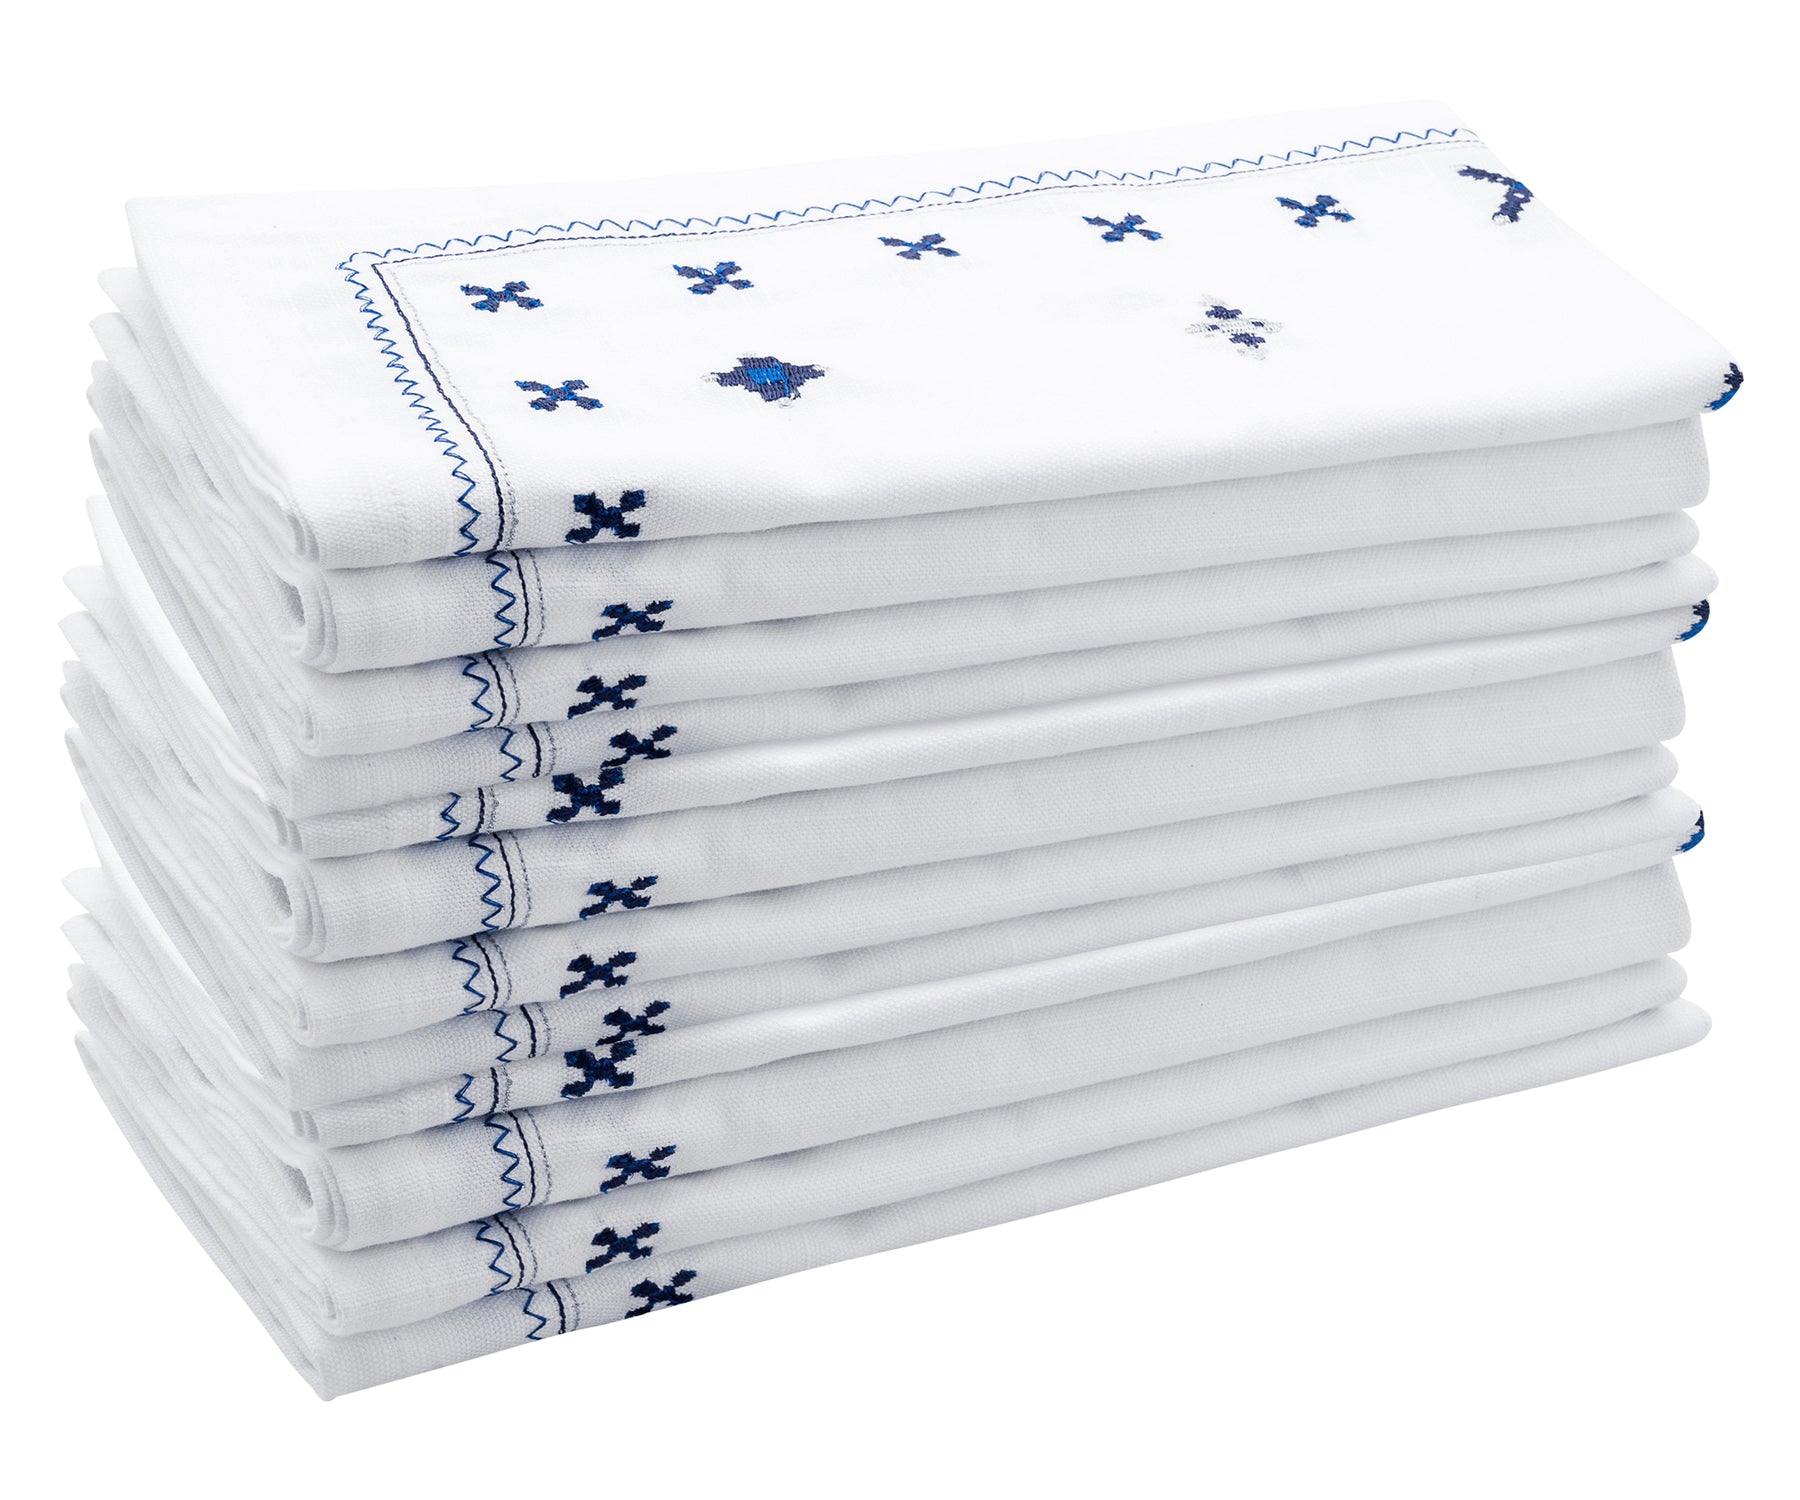 Elegant Embroidery Napkins for Special Occasions